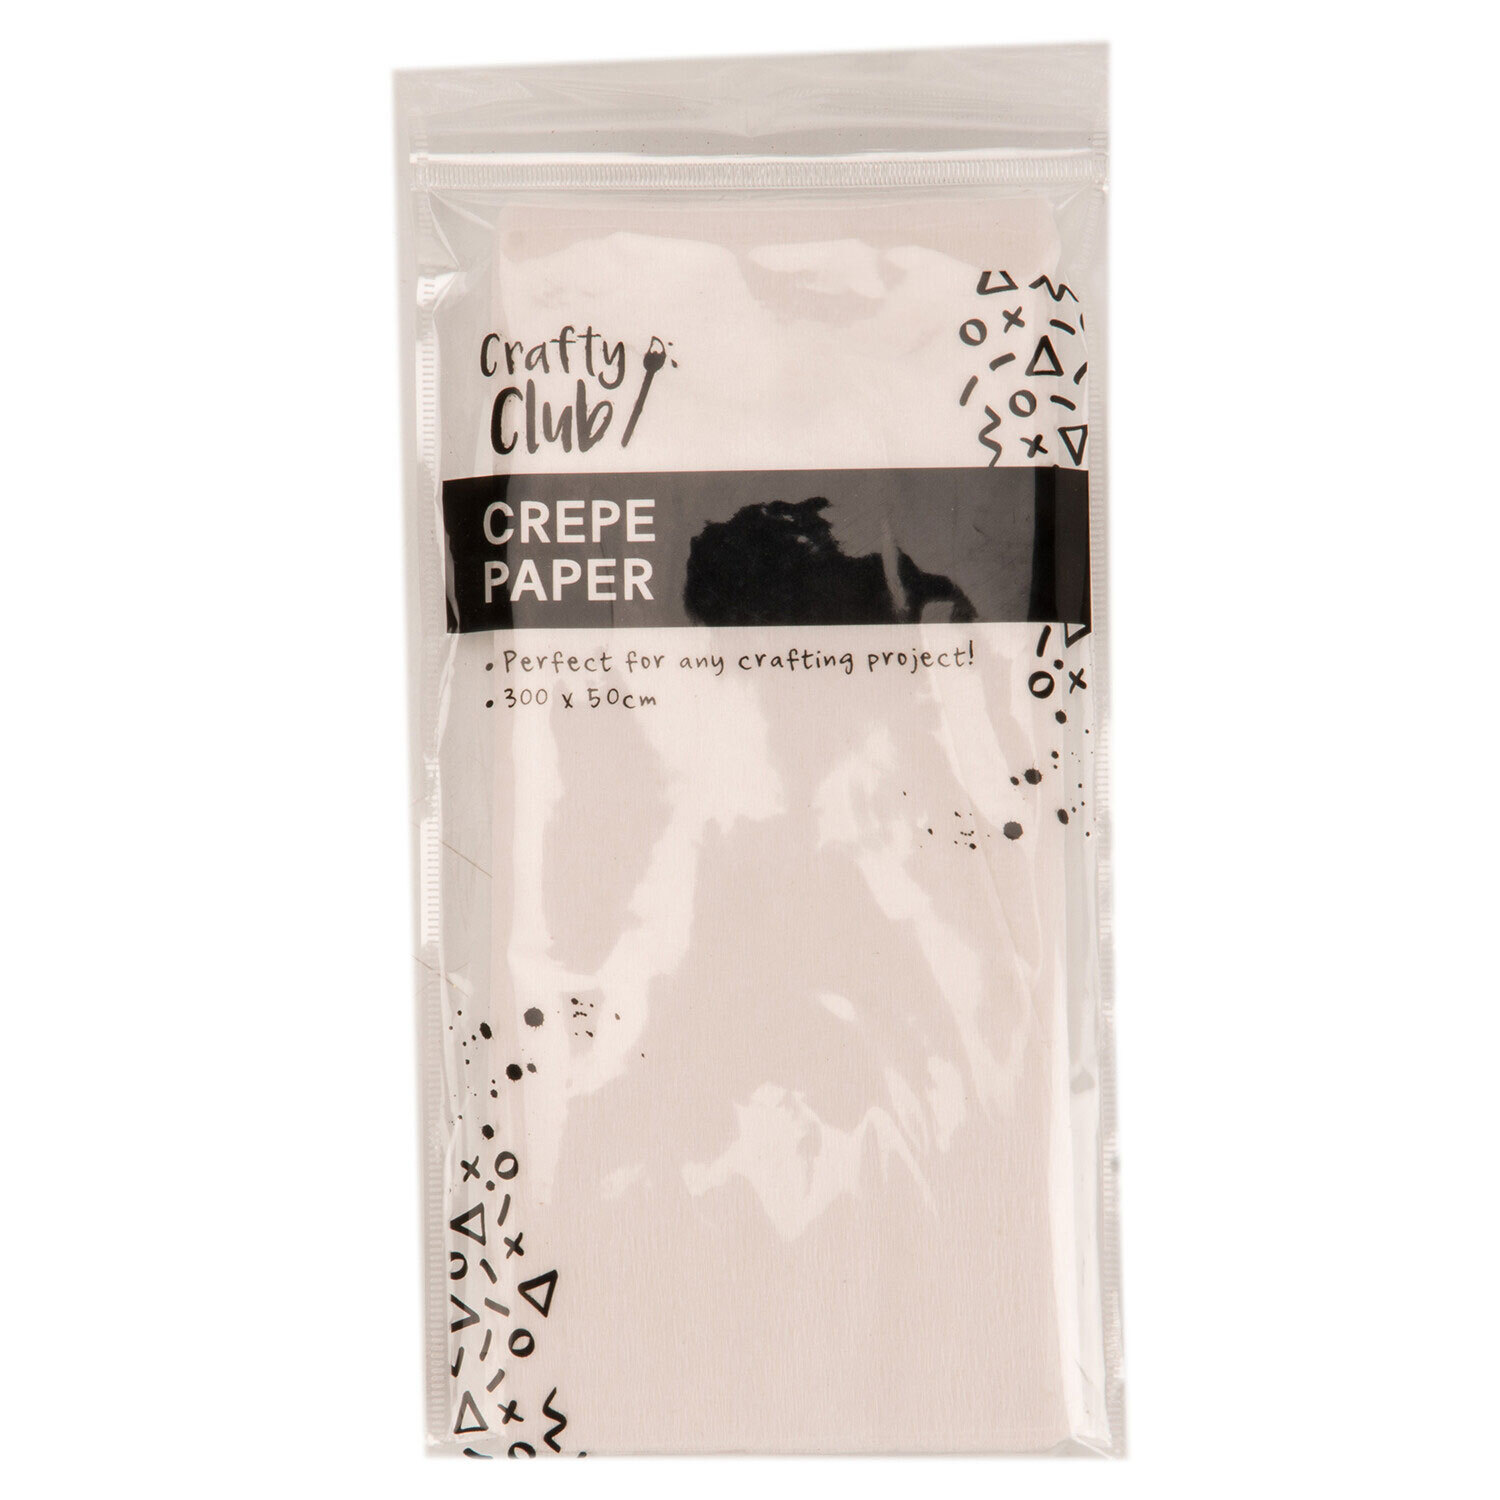 Crafty Club Crepe Paper - White Image